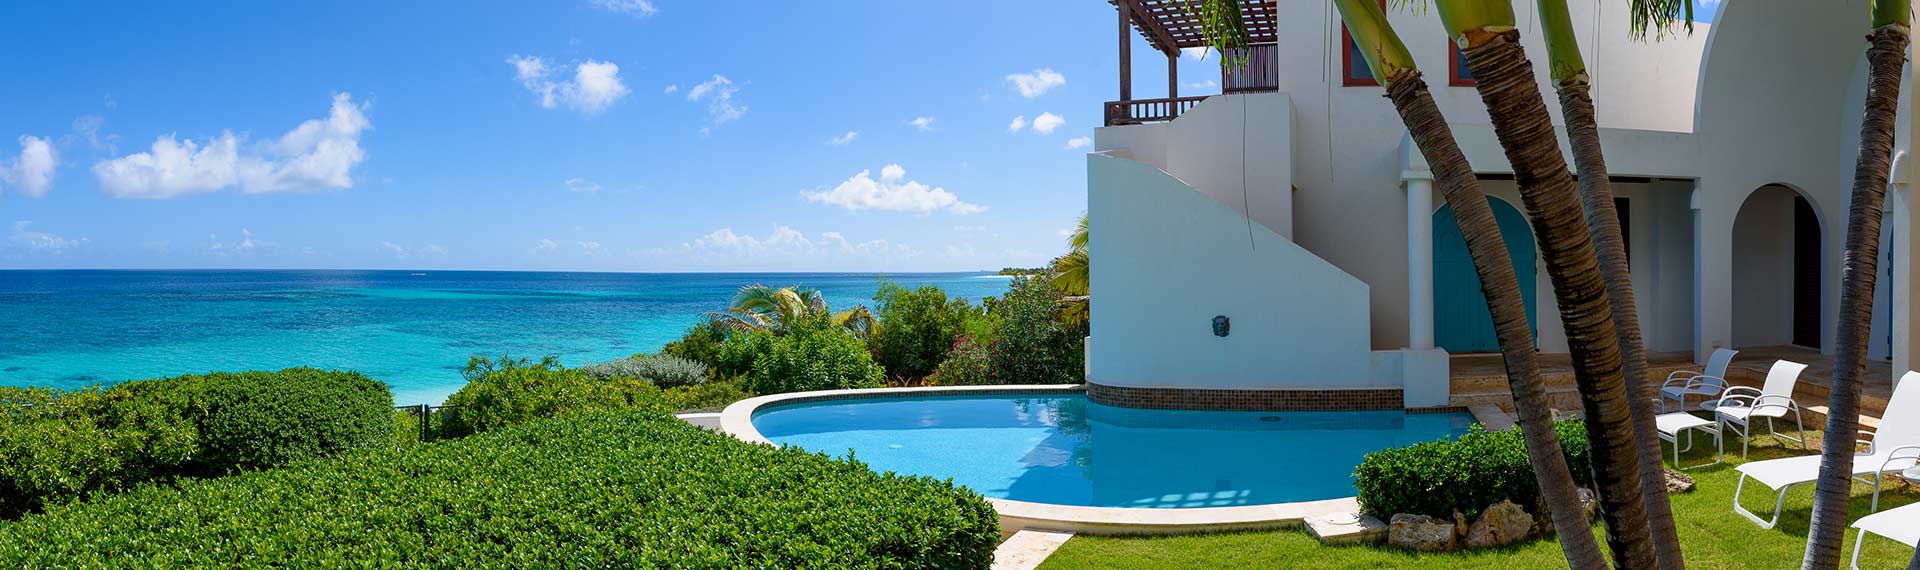 Shoal Bay is on of Anguilla's most famous destinations.